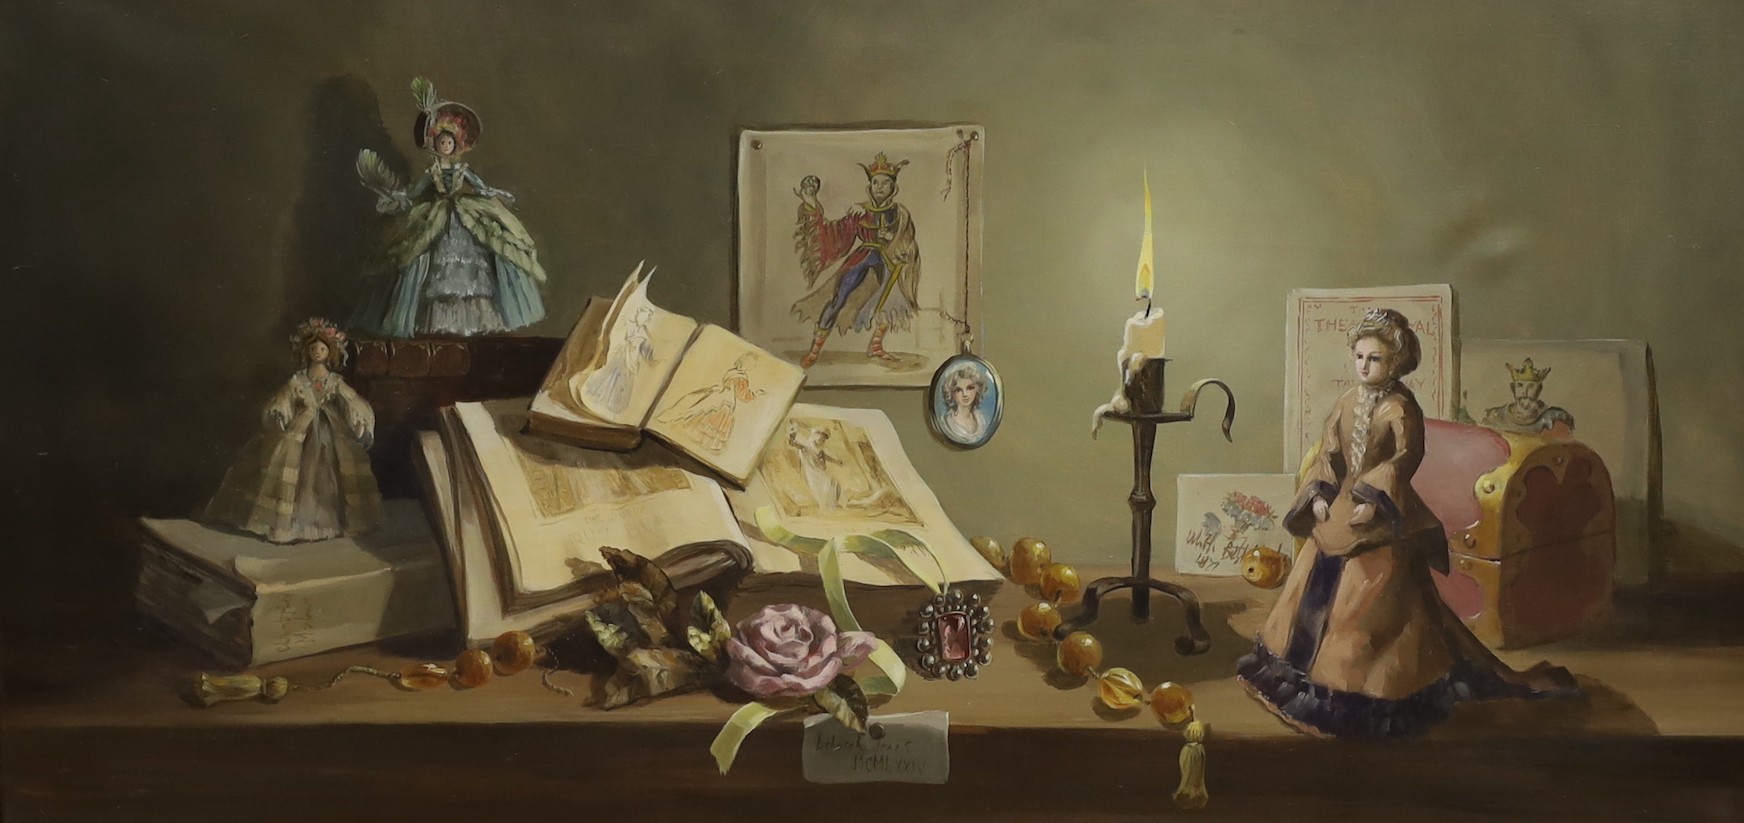 Deborah Jones (1921-2012), oil on canvas, Still life with books, dolls and candle, signed and dated 1974, label verso, 45 x 91cm.